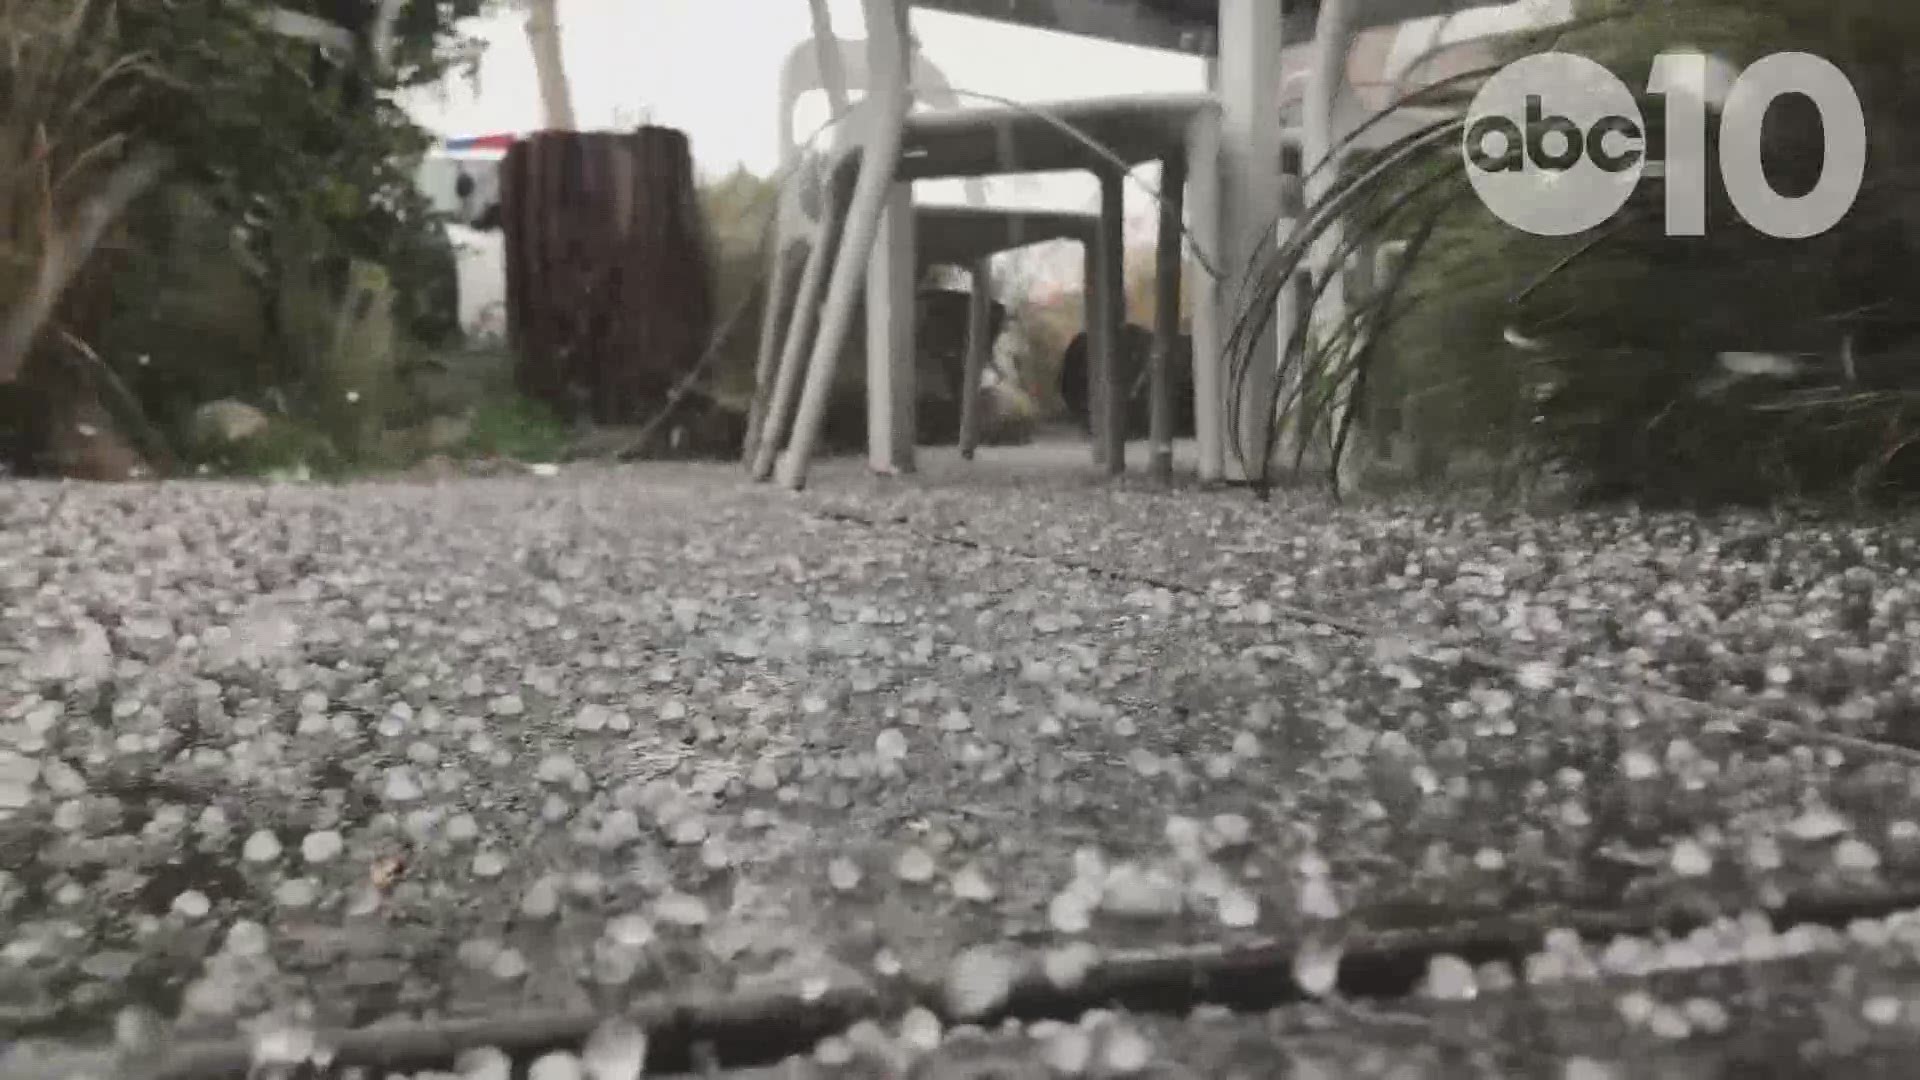 ABC10's Becca Habegger shot this video of hail coming down in Sacramento right outside of Temple Coffee on 28th and S Streets.